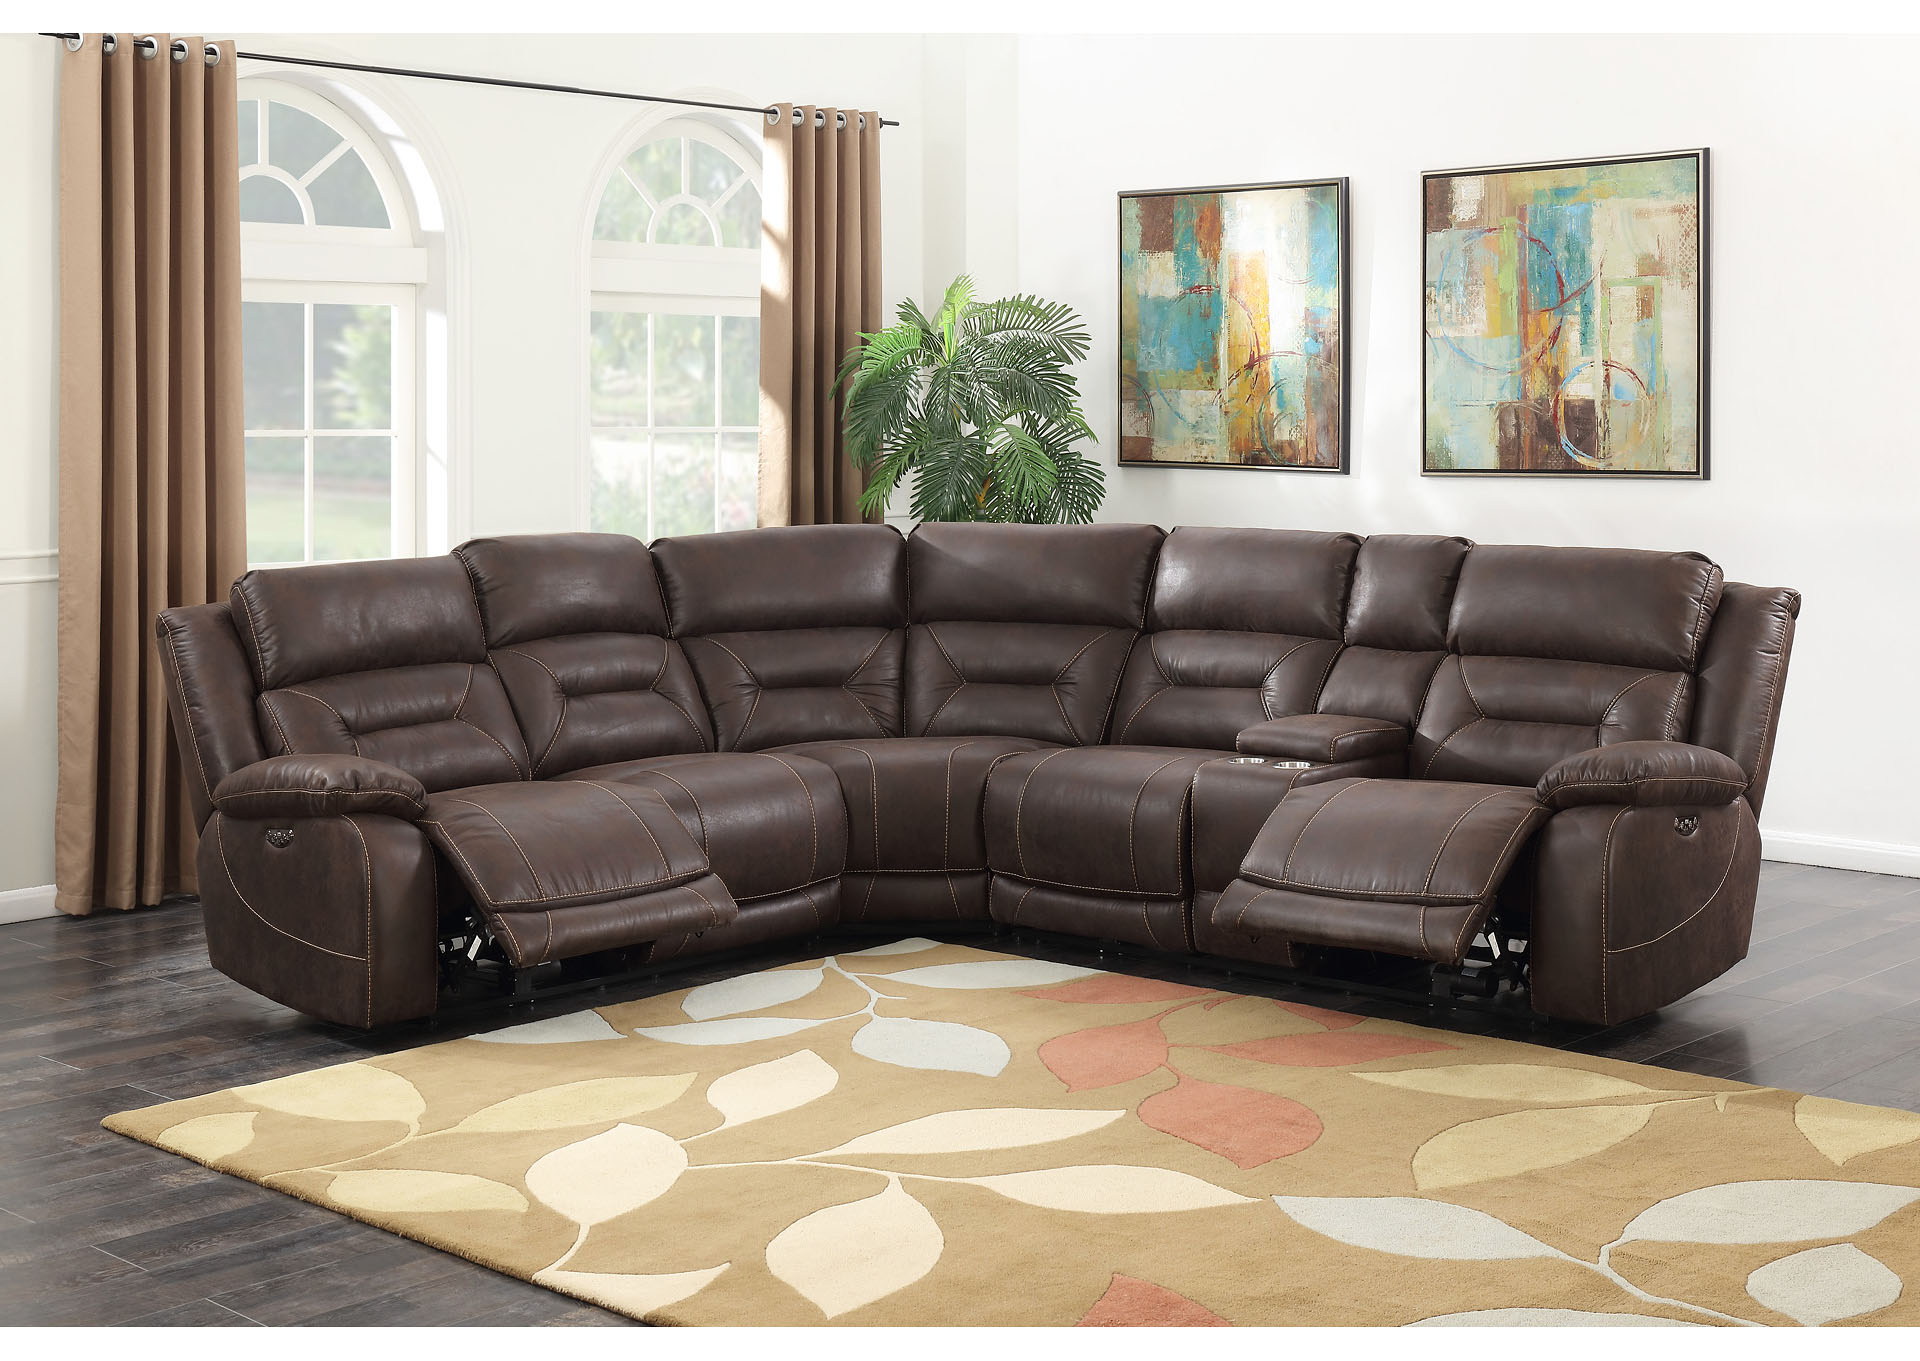 Aria Saddle Brown 3 Piece Sectional Sofa,Steve Silver